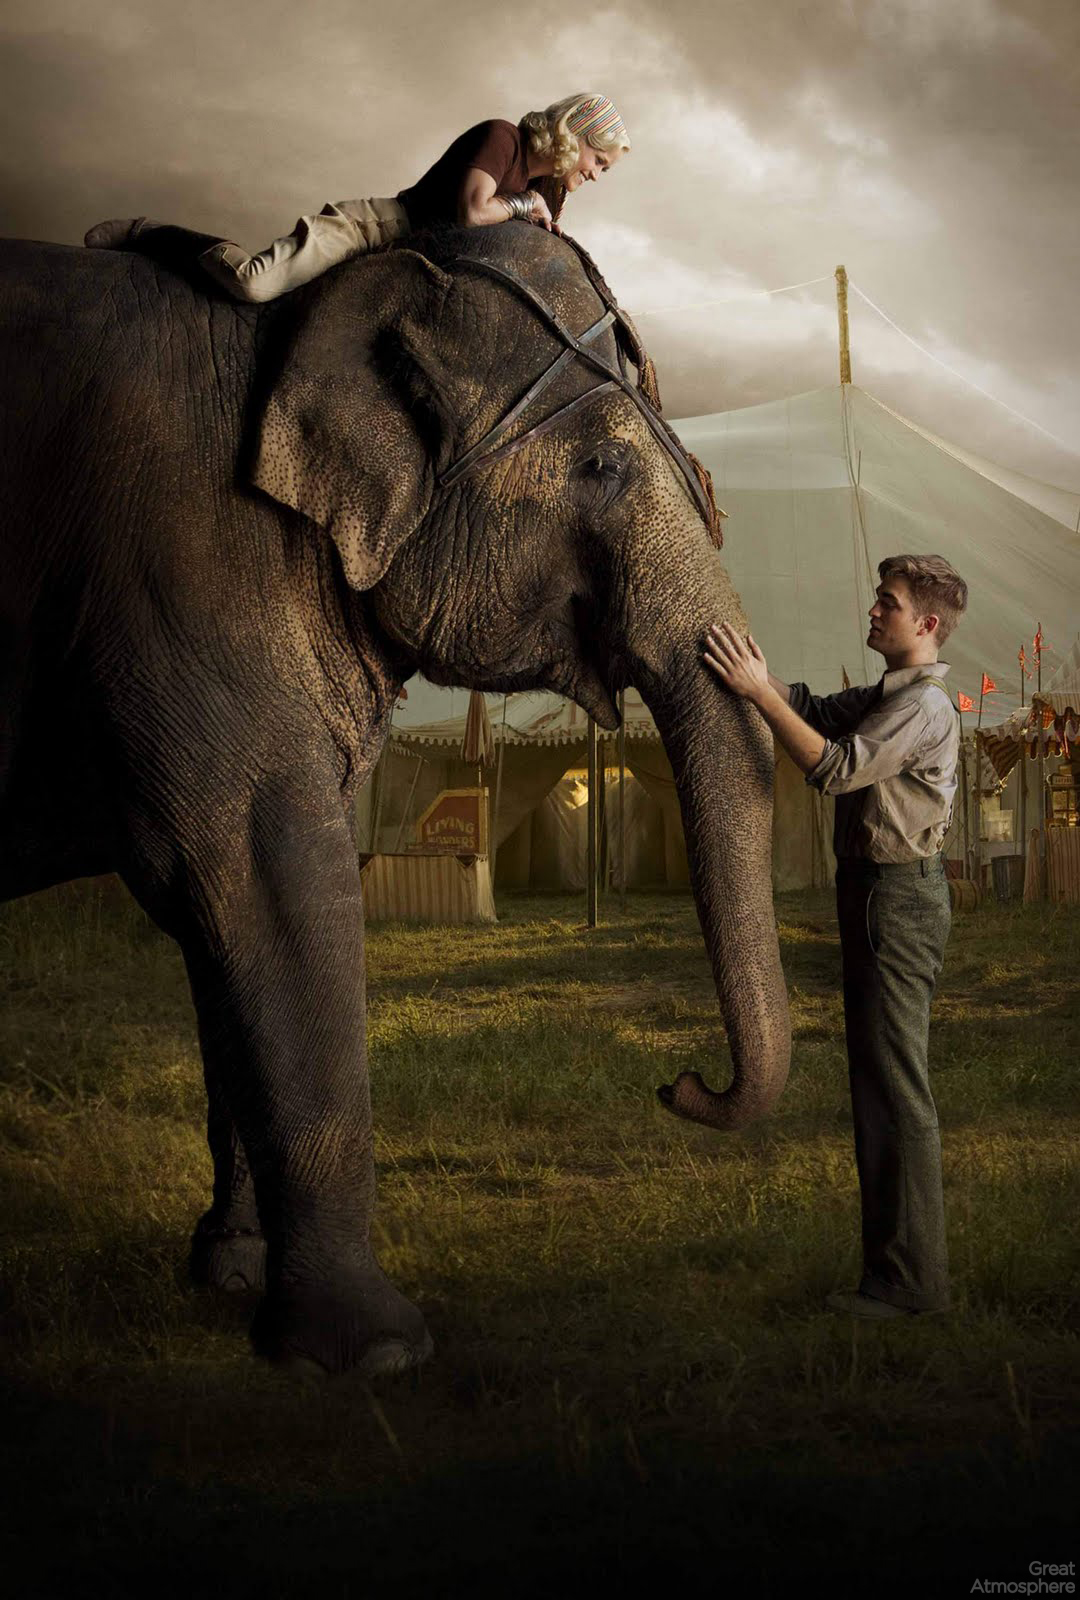 High Resolution Wallpaper | Water For Elephants 1080x1600 px